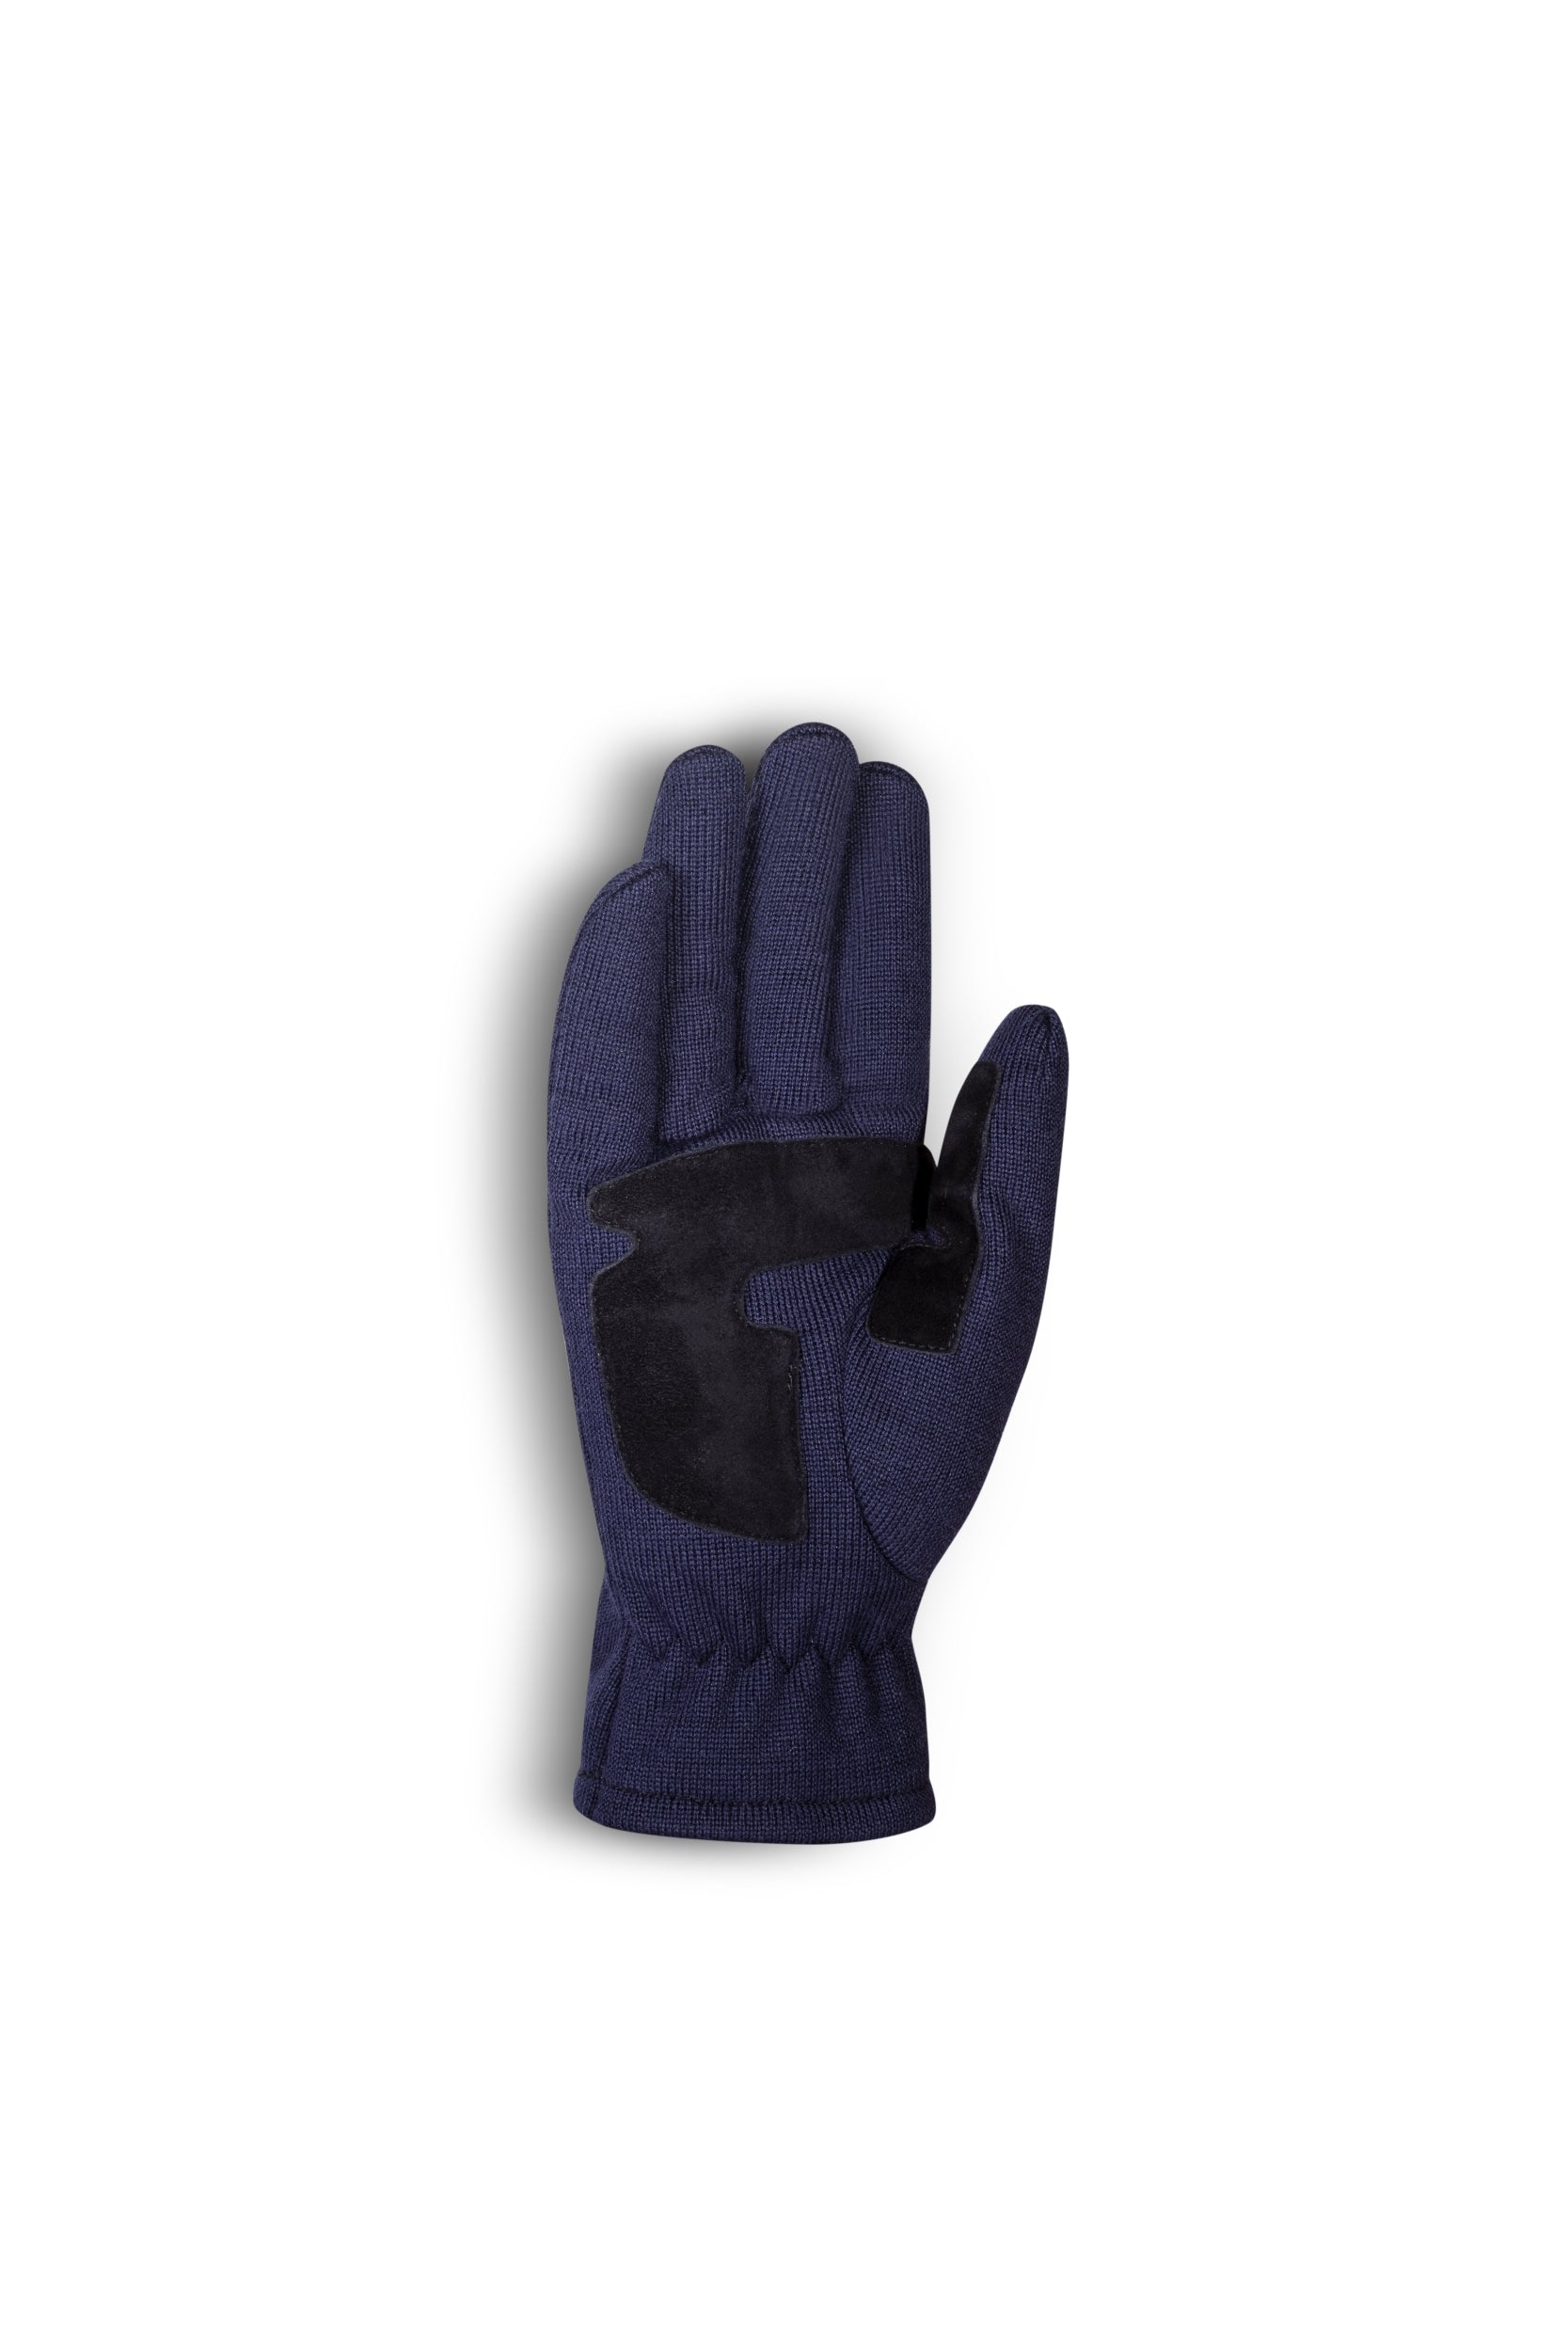 SPARCO 00208212BM NEW WOOL SPORTDRIVE Gloves, navy blue, size 12 Photo-1 